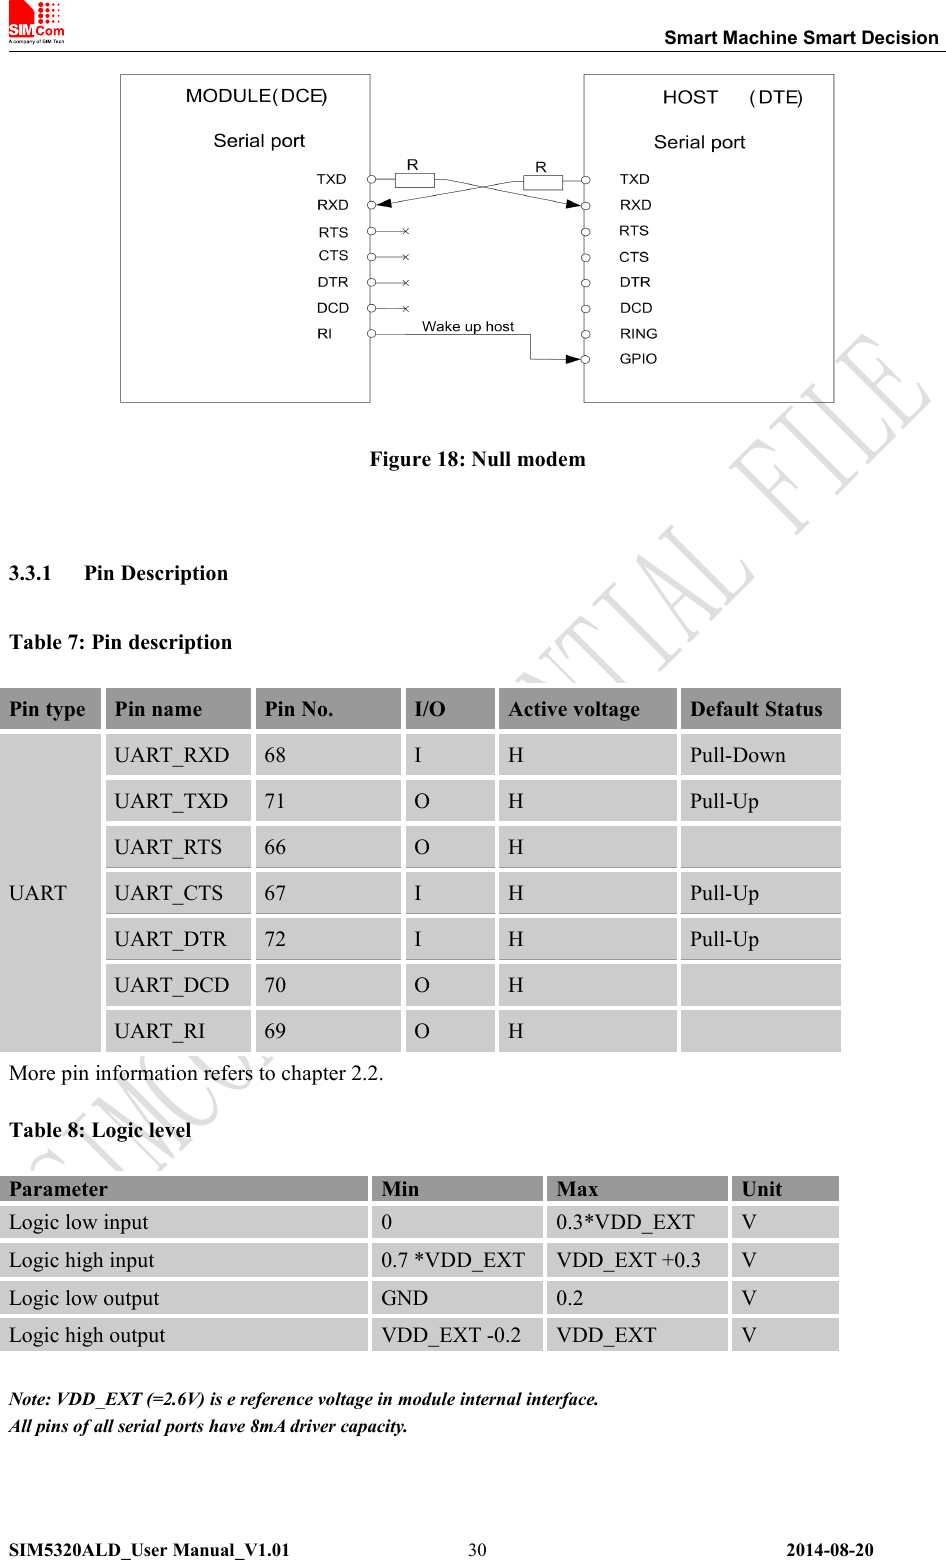 Smart Machine Smart DecisionSIM5320ALD_User Manual_V1.01 2014-08-2030Figure 18: Null modem3.3.1 Pin DescriptionTable 7: Pin descriptionPin type Pin name Pin No. I/O Active voltage Default StatusUARTUART_RXD 68 I H Pull-DownUART_TXD 71 O H Pull-UpUART_RTS 66 O HUART_CTS 67 I H Pull-UpUART_DTR 72 I H Pull-UpUART_DCD 70 O HUART_RI 69 O HMore pin information refers to chapter 2.2.Table 8: Logic levelParameter Min Max UnitLogic low input 0 0.3*VDD_EXT VLogic high input 0.7 *VDD_EXT VDD_EXT +0.3 VLogic low output GND 0.2 VLogic high output VDD_EXT -0.2 VDD_EXT VNote: VDD_EXT (=2.6V) is e reference voltage in module internal interface.All pins of all serial ports have 8mA driver capacity.